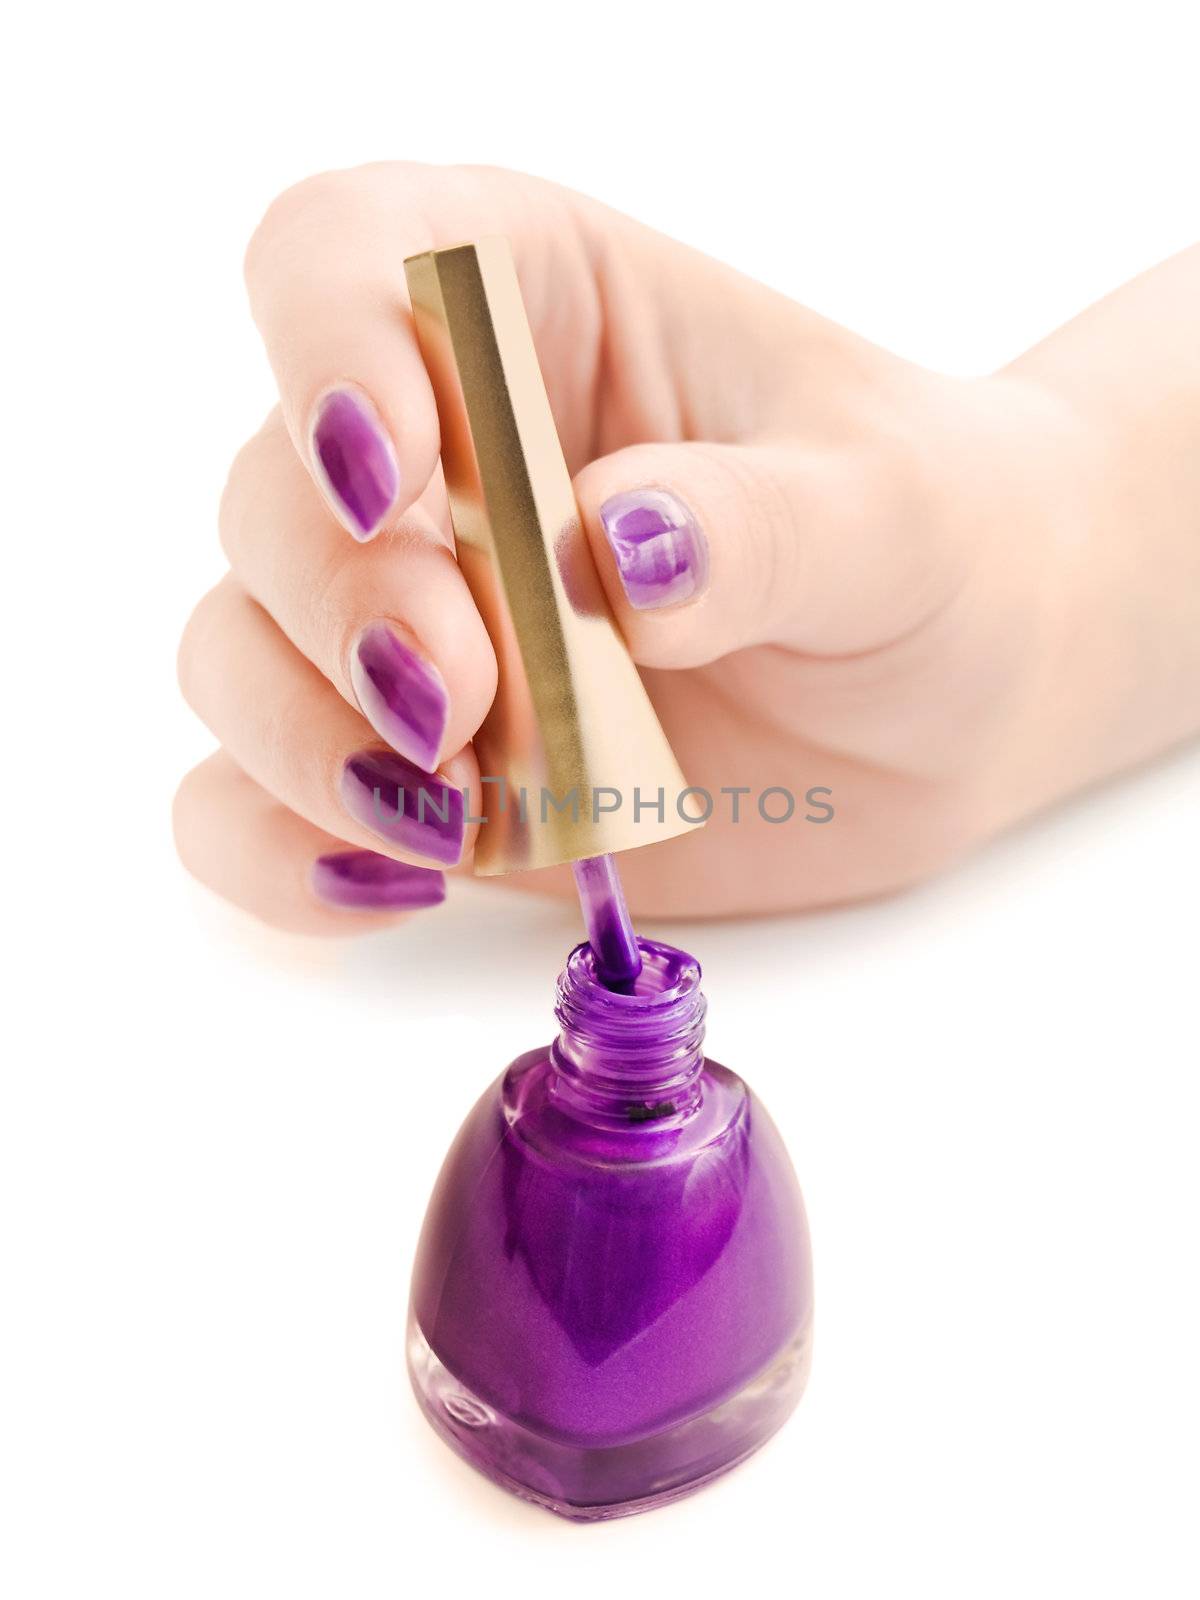 manicure: nail polish and woman hand over white background